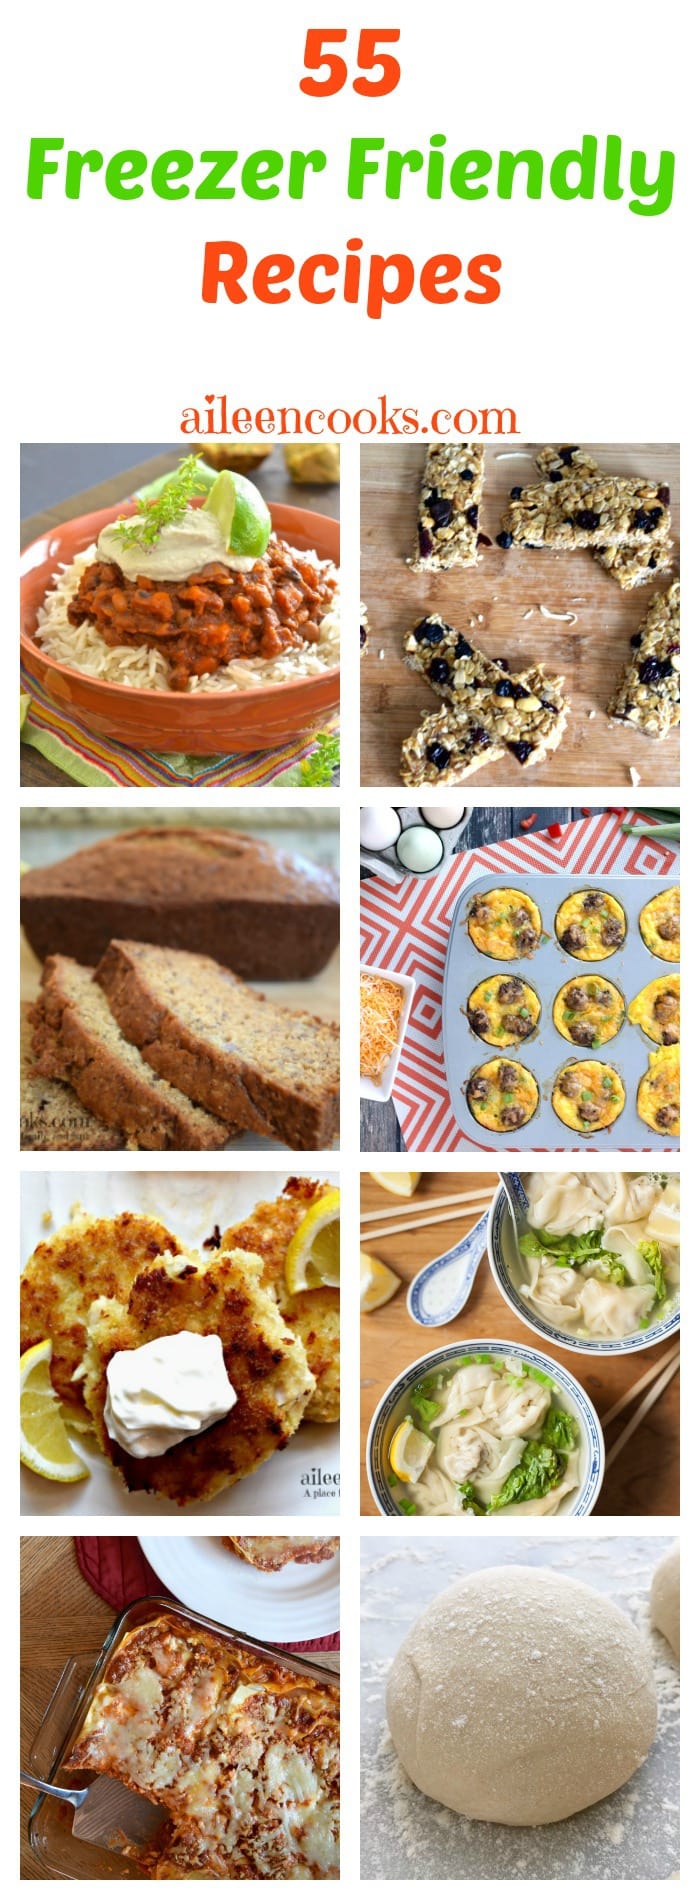 55 Freezer Friendly Recipes inlcuding breakfast, lunch, dinner, snack, and dessert recipes - all ready to be made into freezer meals. https://aileencooks.com